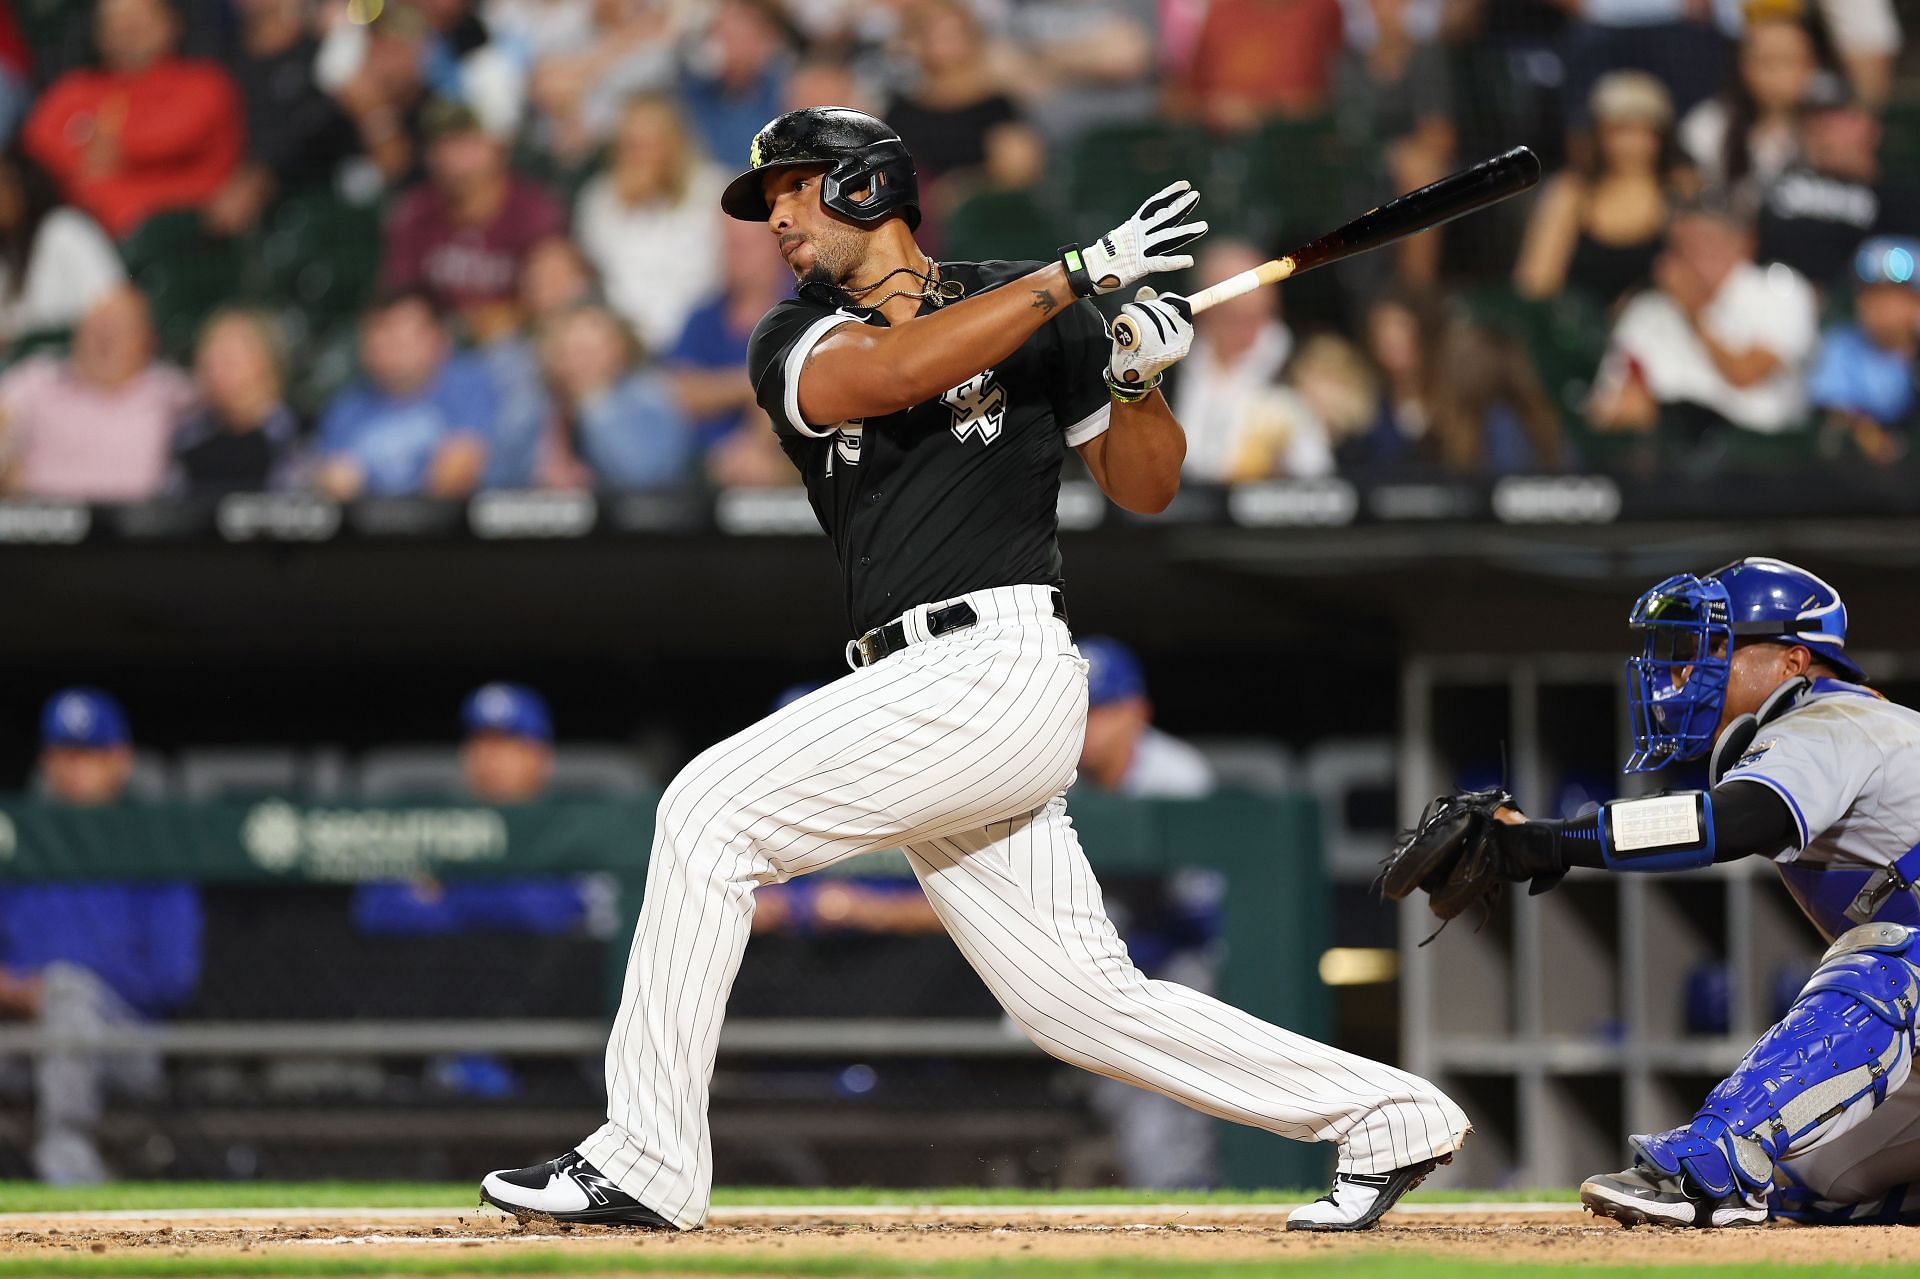 Kansas City Royals v Chicago White Sox: CHICAGO, ILLINOIS - AUGUST 30: Jose Abreu (79) of the Chicago White Sox at bat against the Kansas City Royals at Guaranteed Rate Field on August 30, 2022, in Chicago, Illinois. (Photo by Michael Reaves/Getty Images)